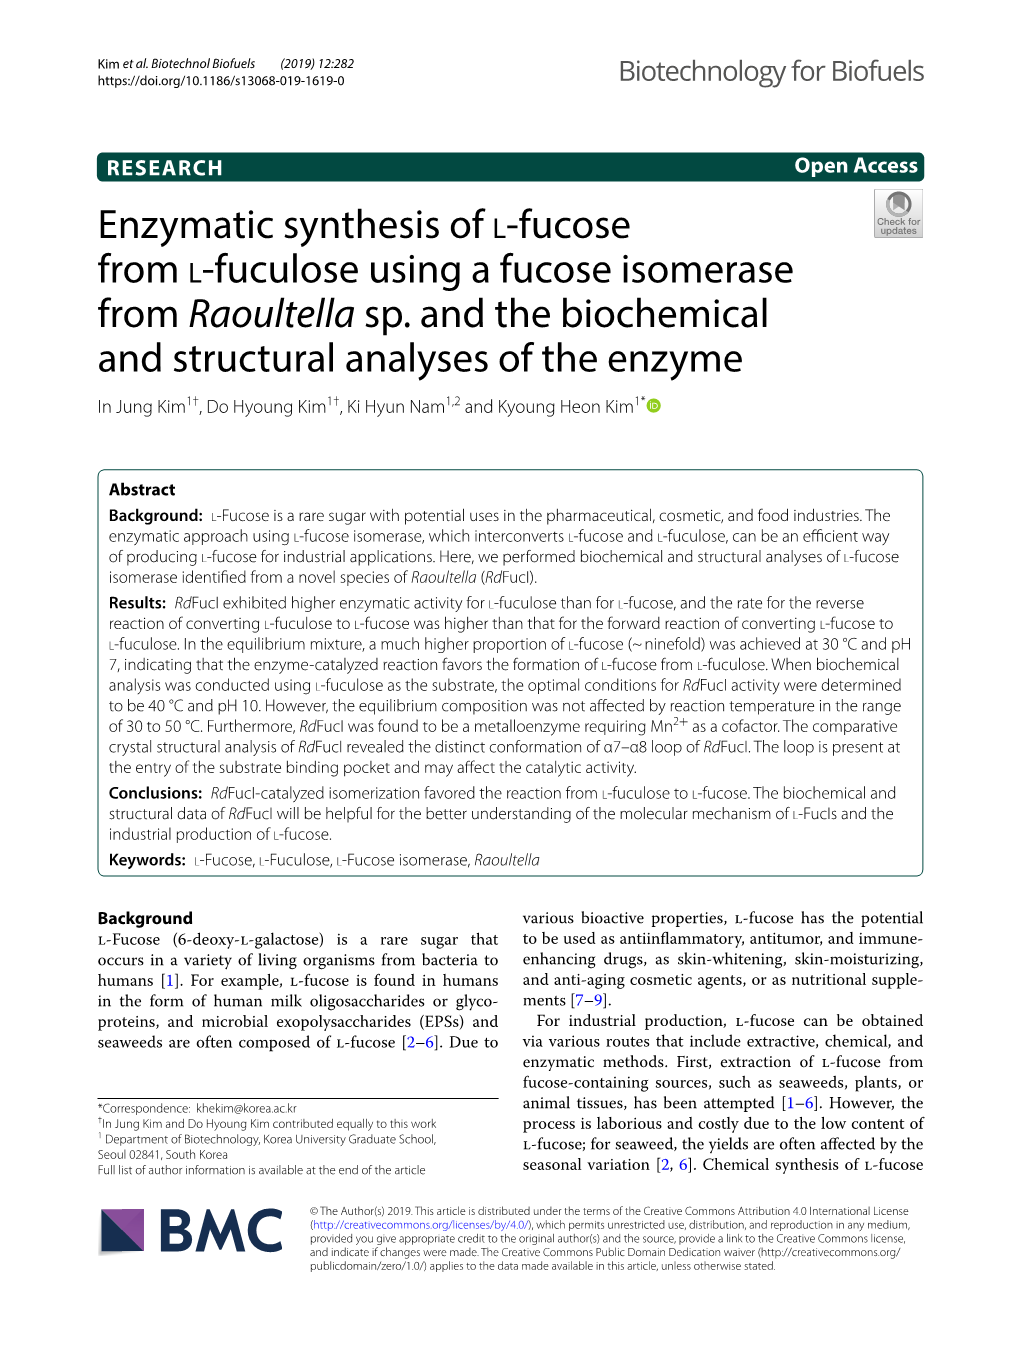 Enzymatic Synthesis of L-Fucose from L-Fuculose Using a Fucose Isomerase